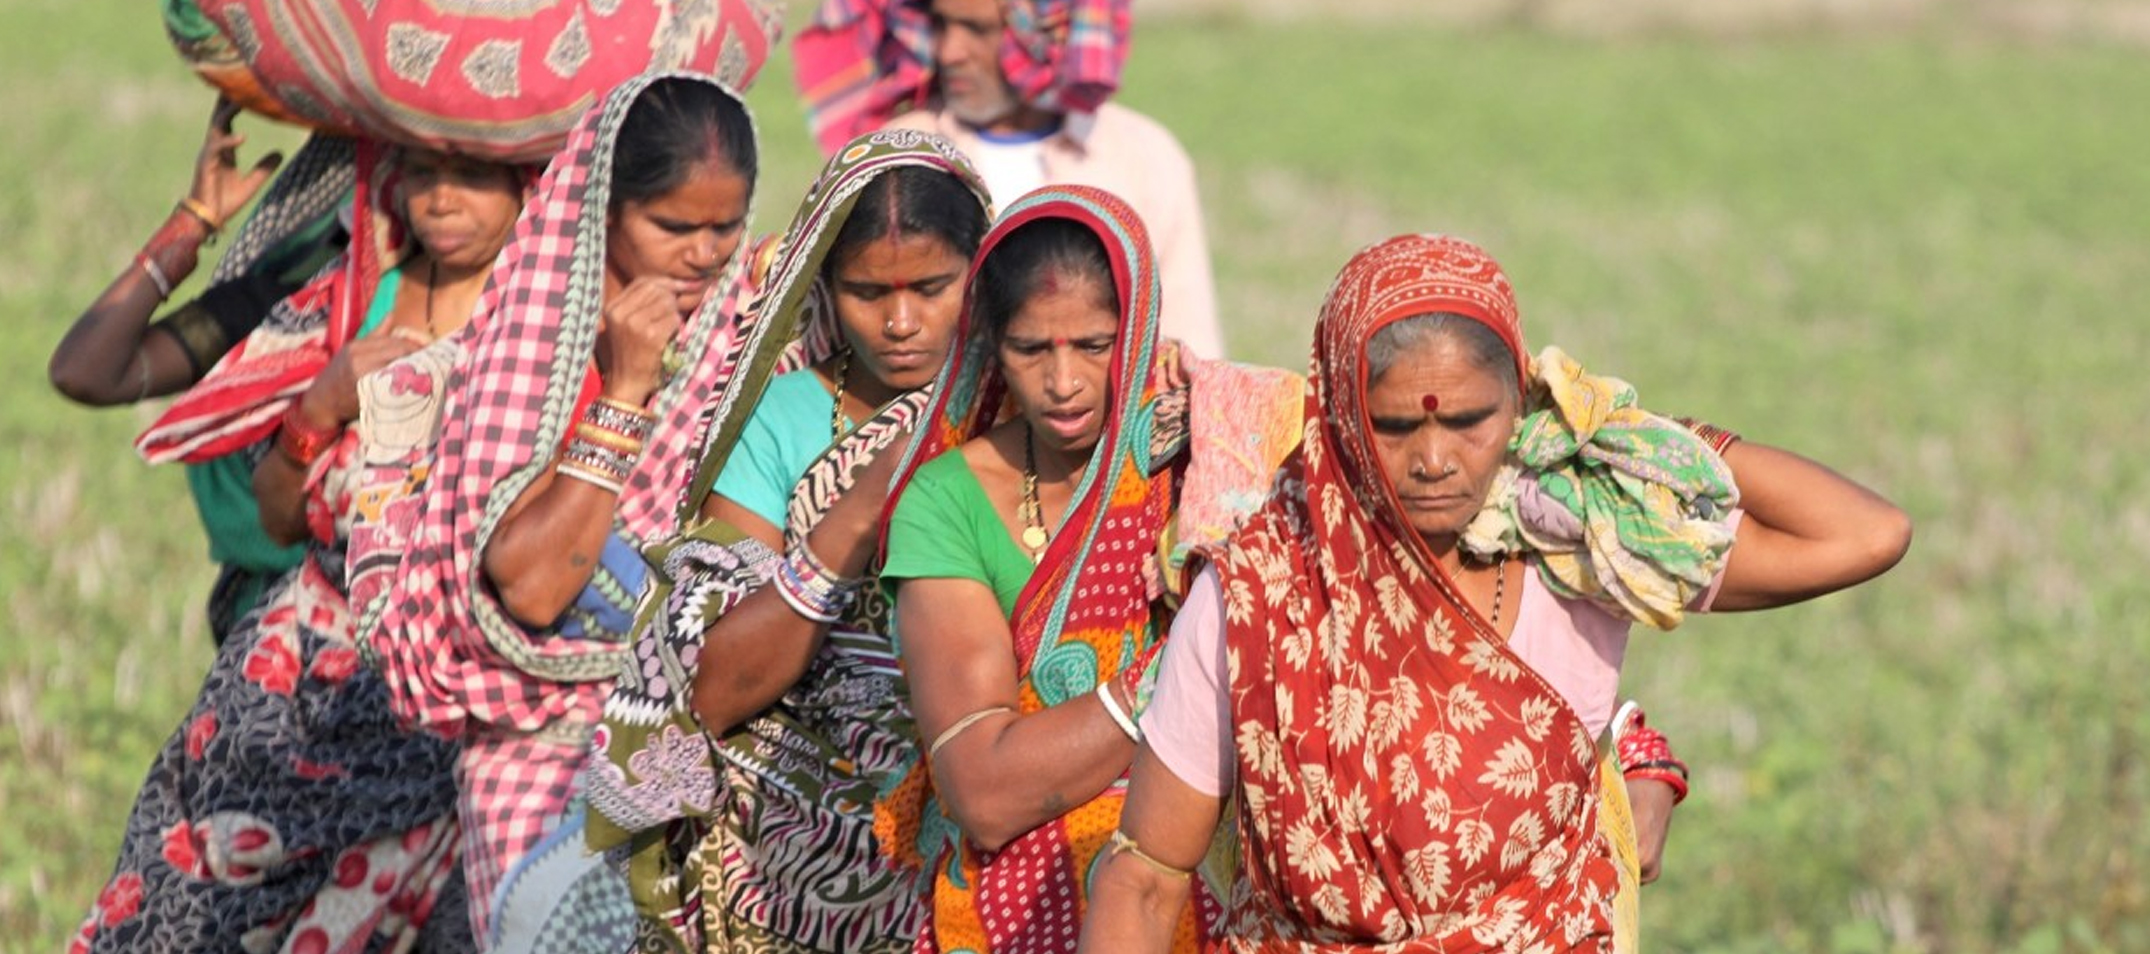 International Day of Rural Women 2019-15 October Theme of International Day of Rural Women 2019- Building resilience to face the climate crisis.